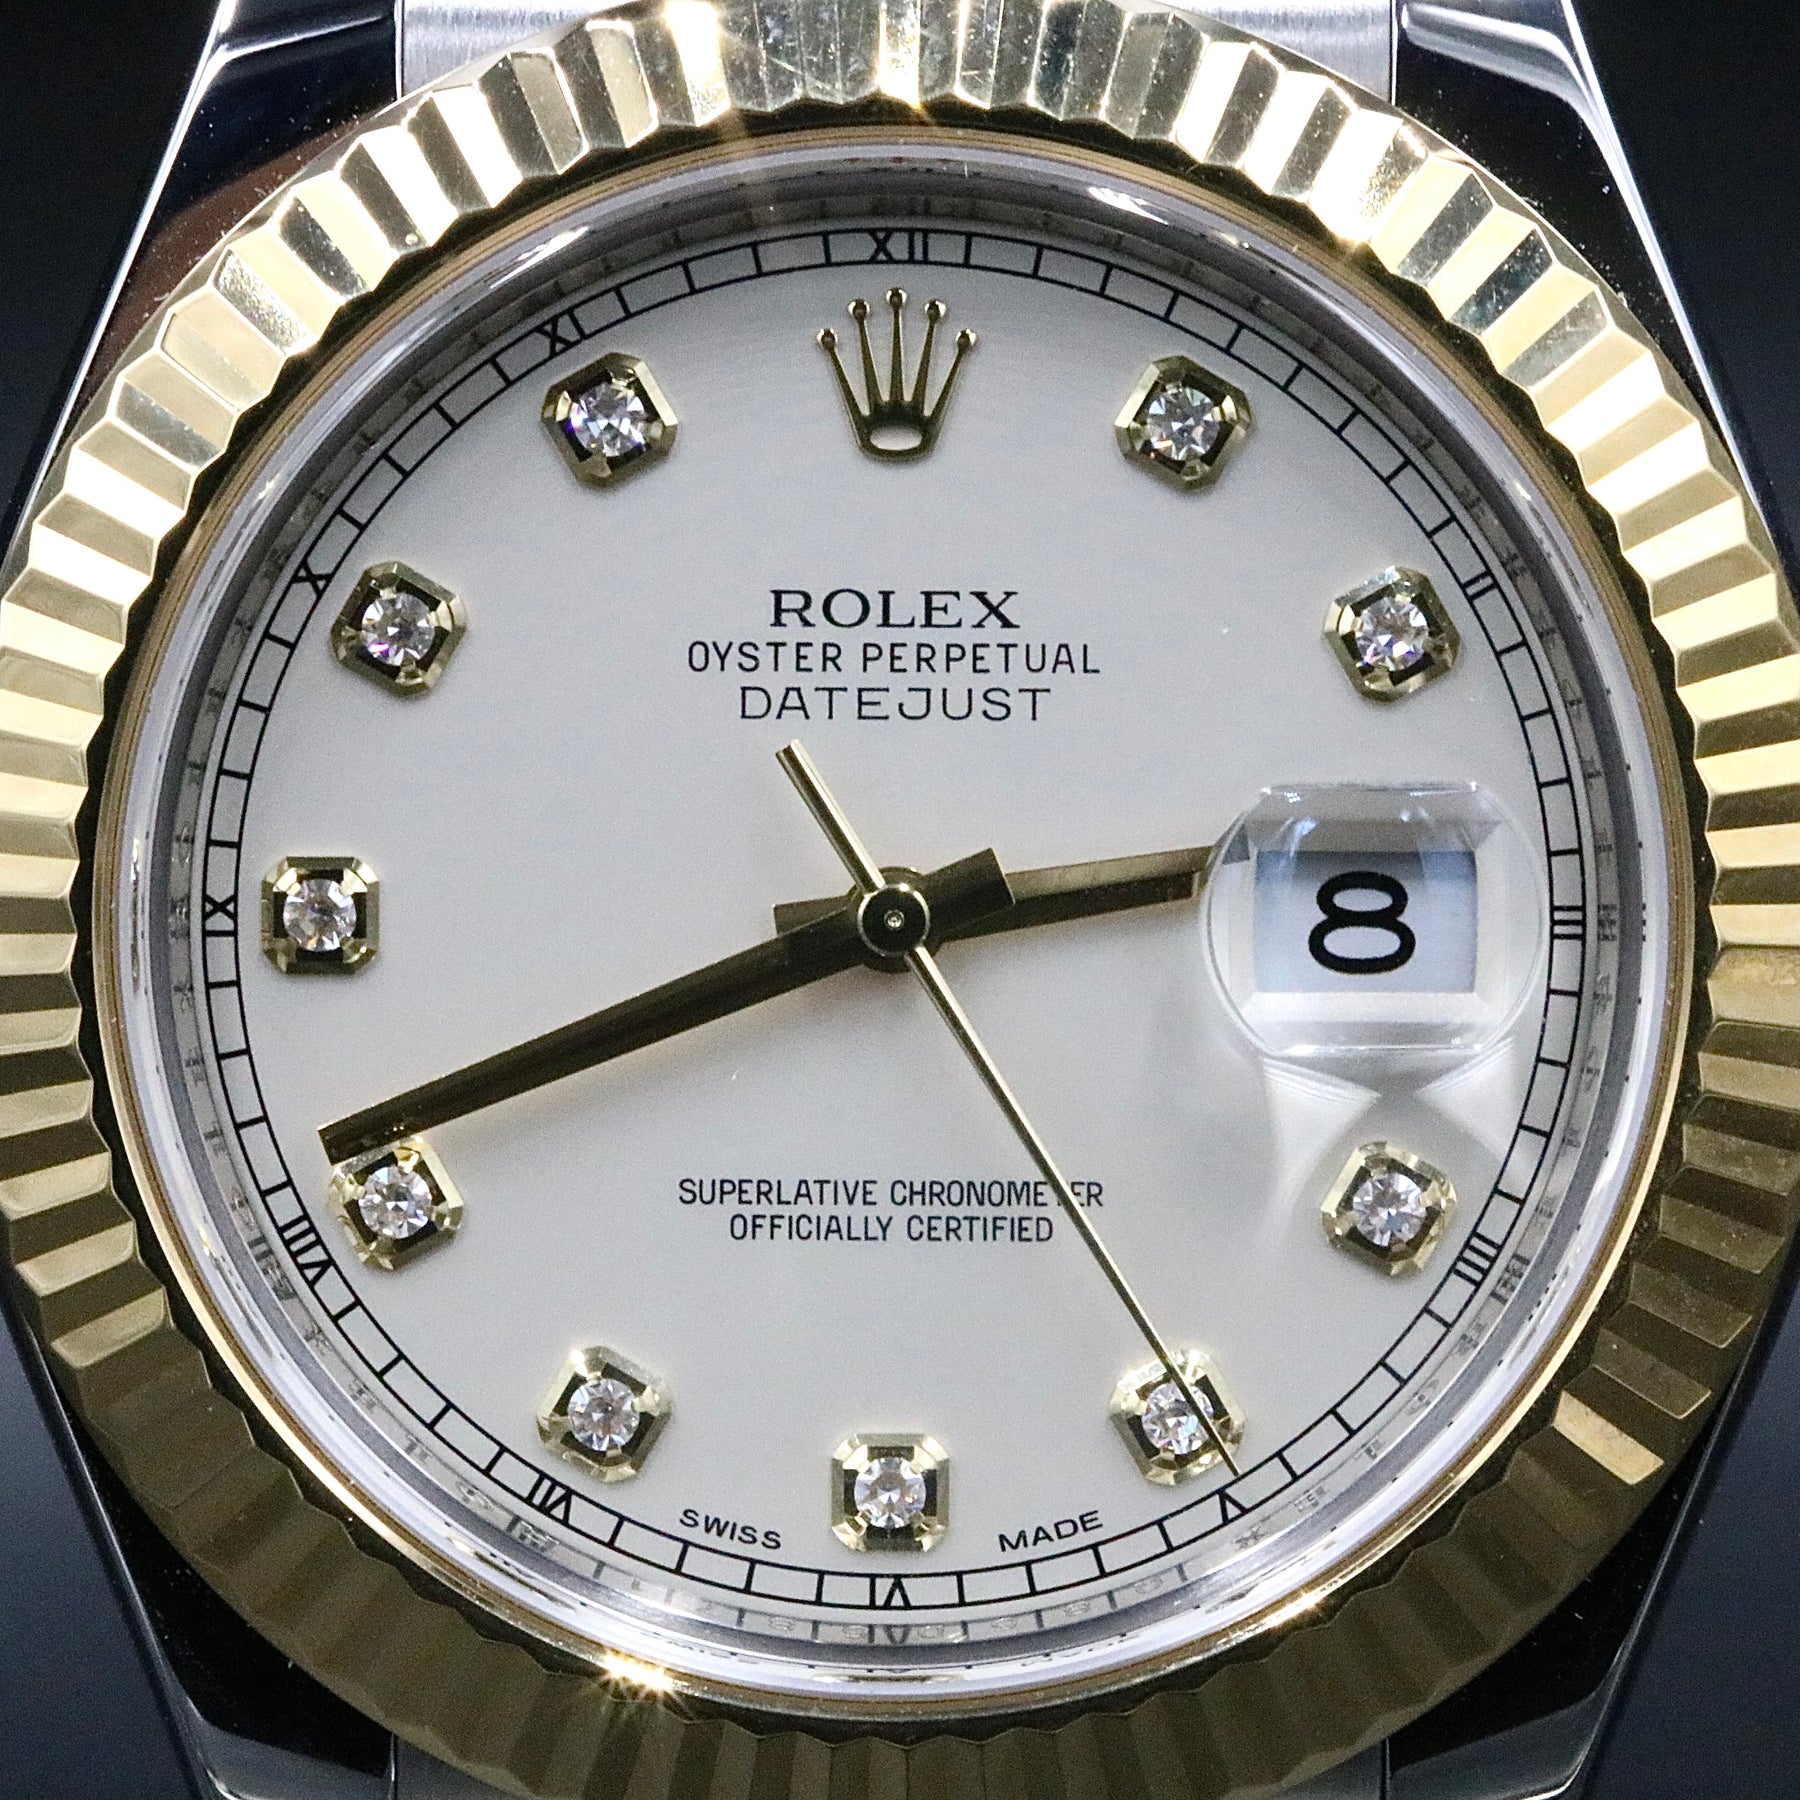 2014 Rolex 116333 Datejust 41mm Original Diamond Dial with Box & Papers